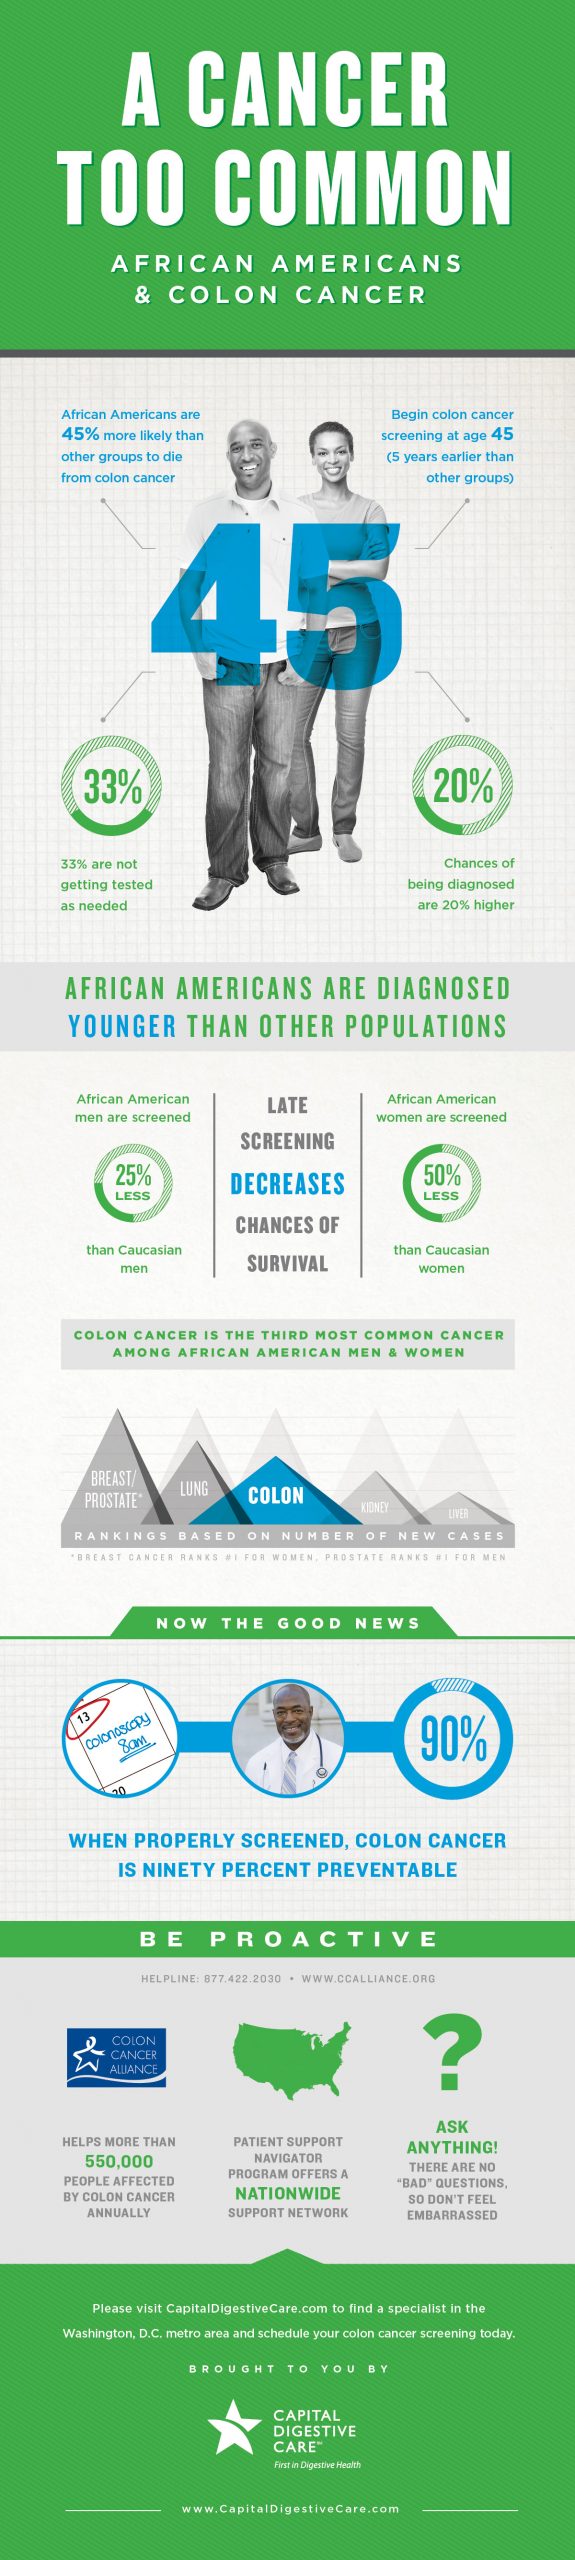 African Americans and Colon Cancer Infographic